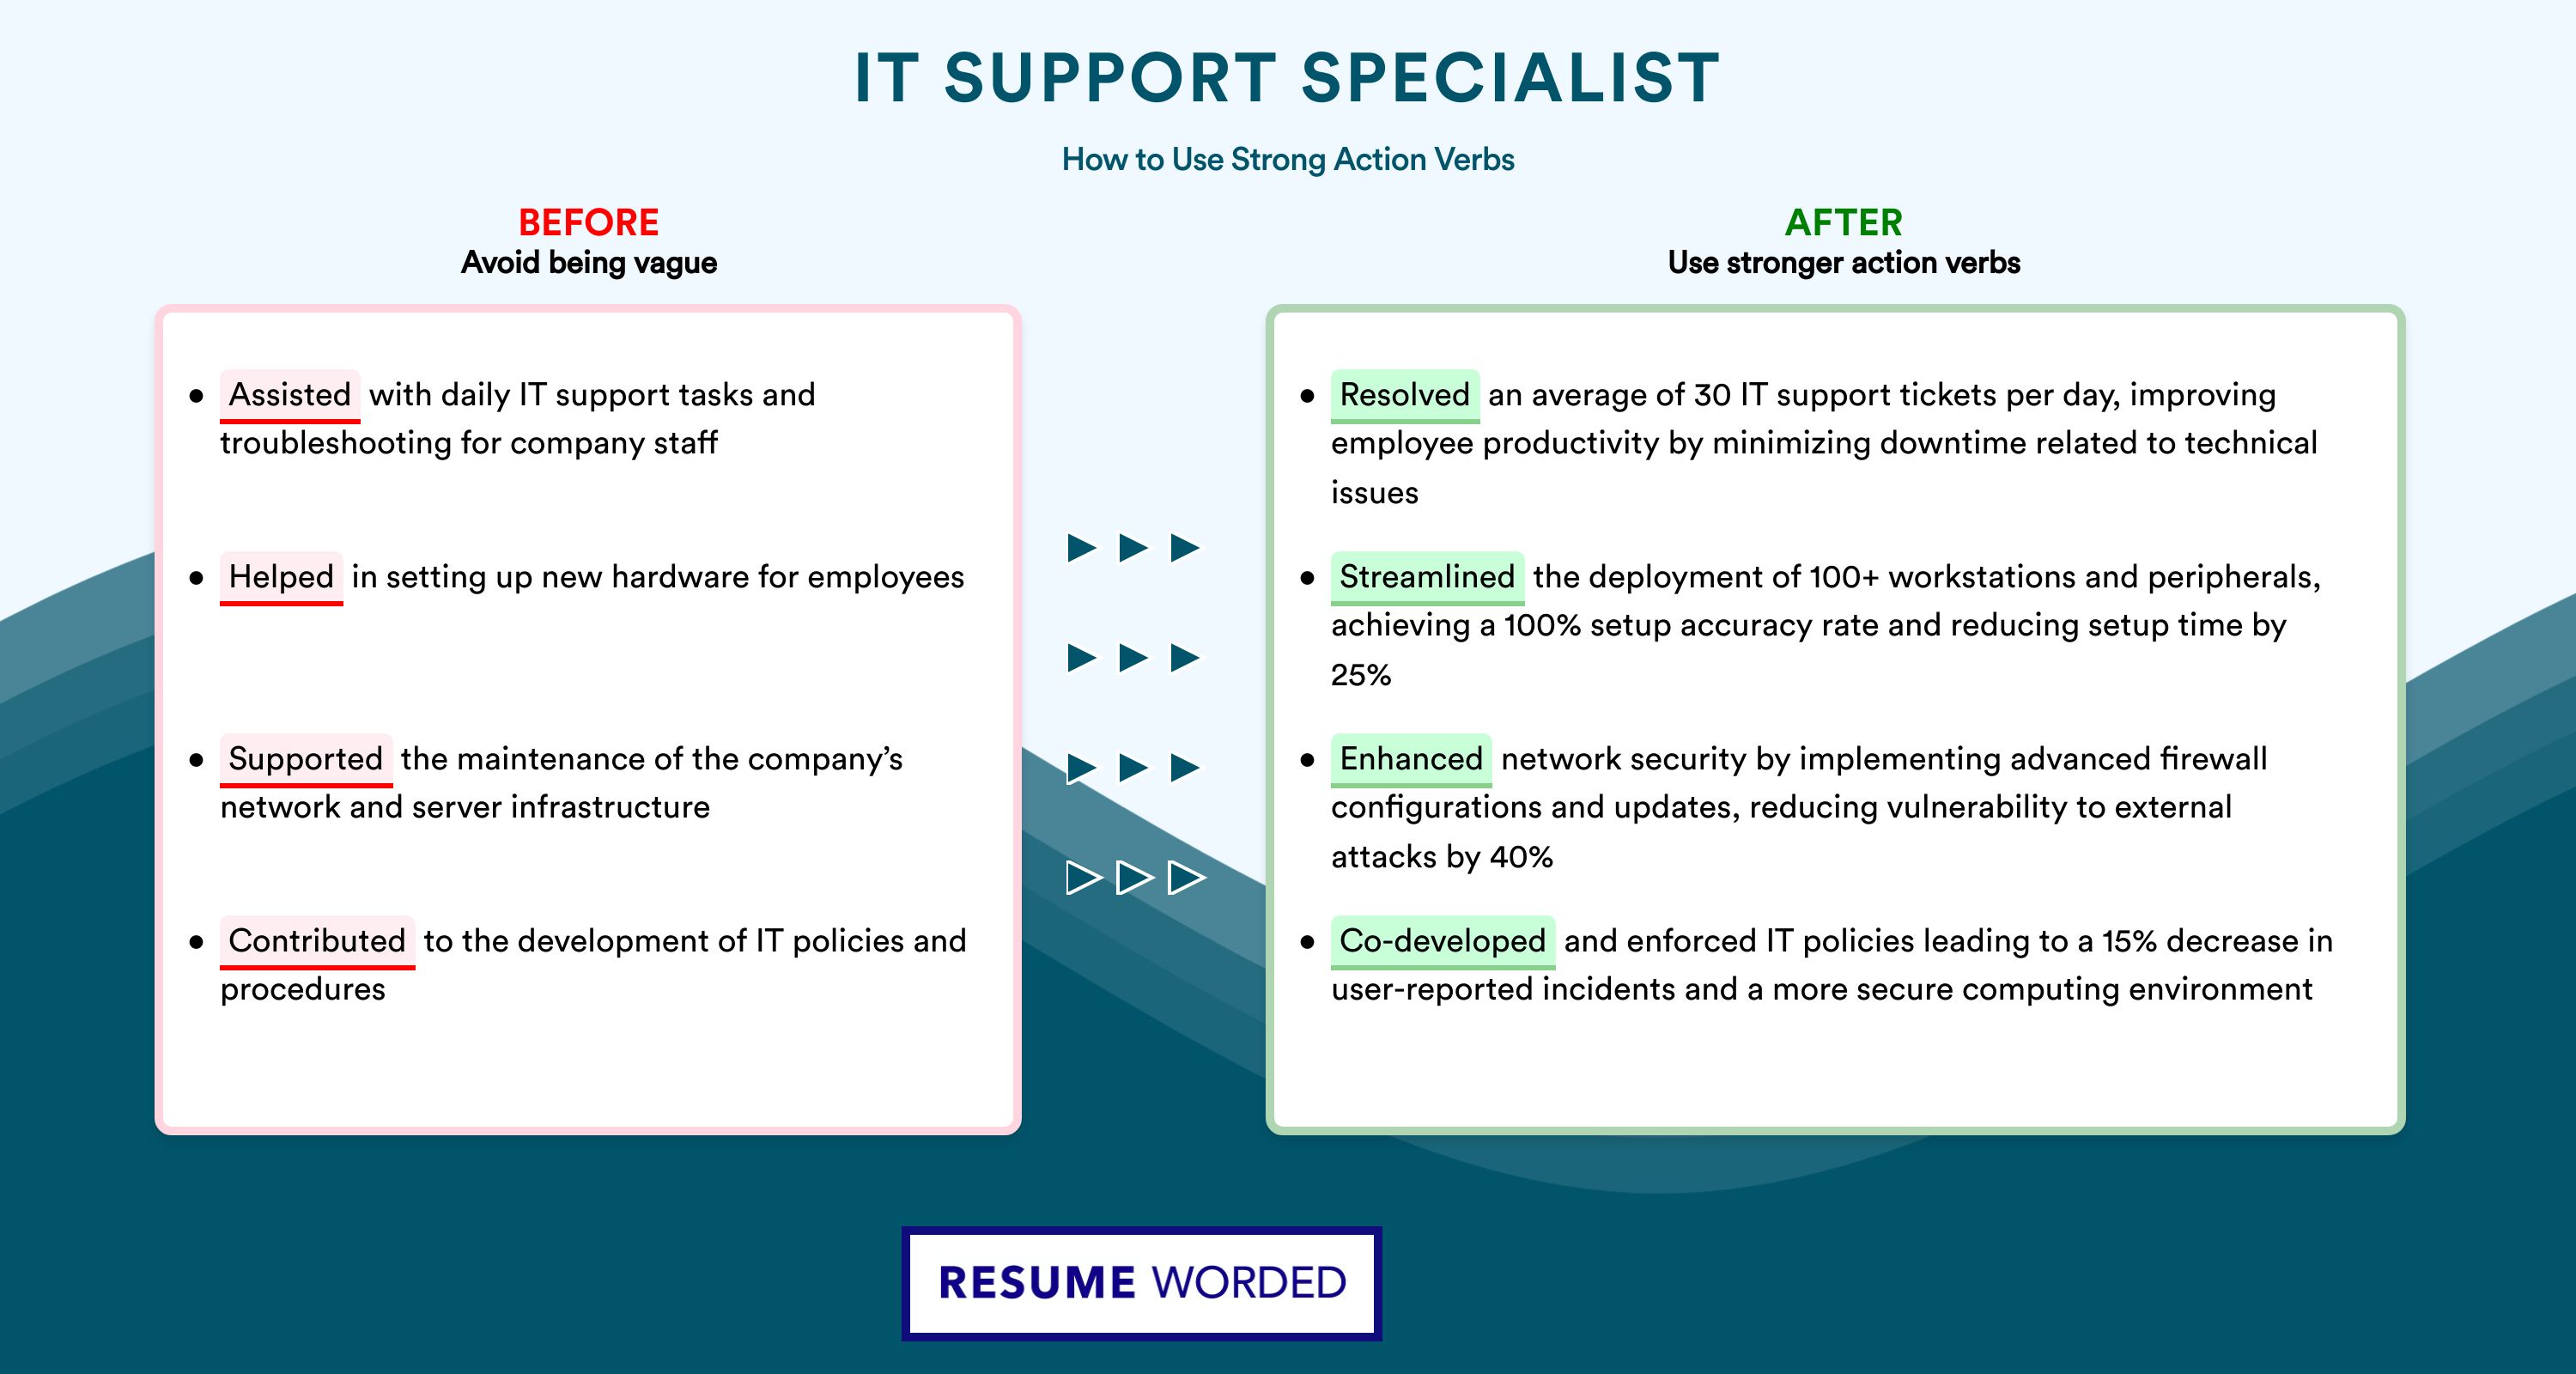 Action Verbs for IT Support Specialist